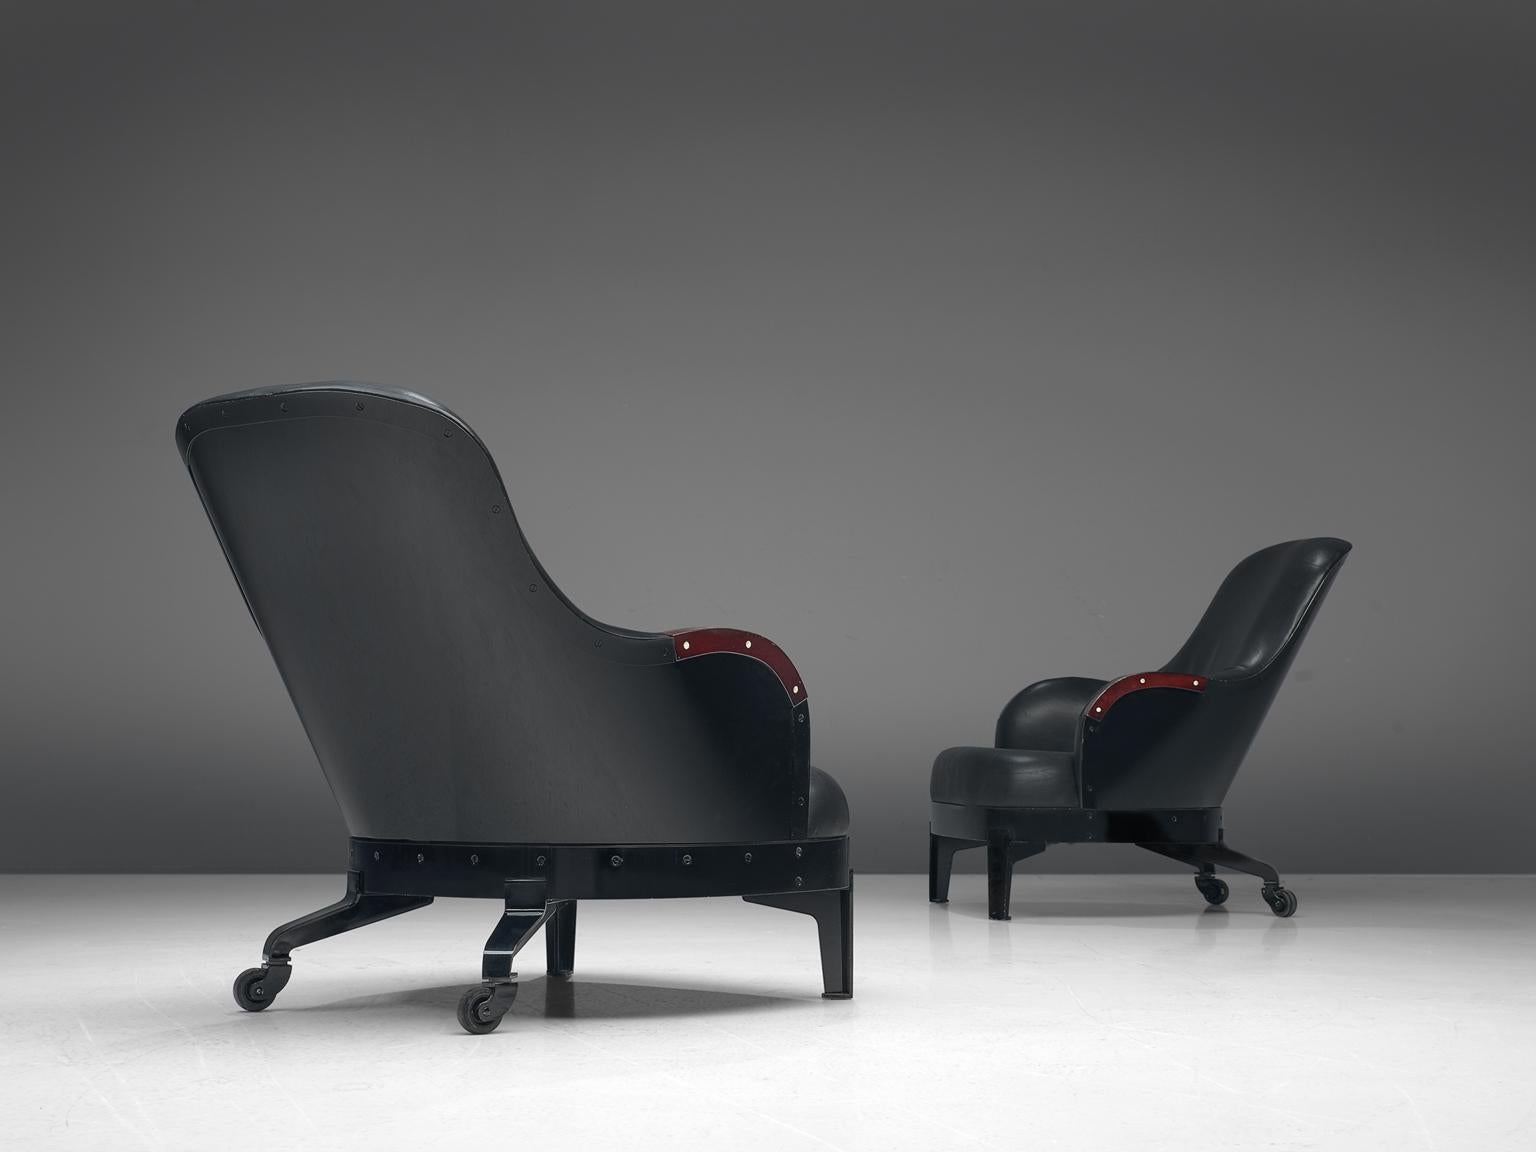 Mats Theselius for Källemo, The Ritz lounge chairs 39/90 and 90/90, in steel, wood, elk horn and leather, Sweden, 1994. 

This limited edition lounge chairs with caster wheels are executed in black enamel steel, black leather upholstery and elk horn